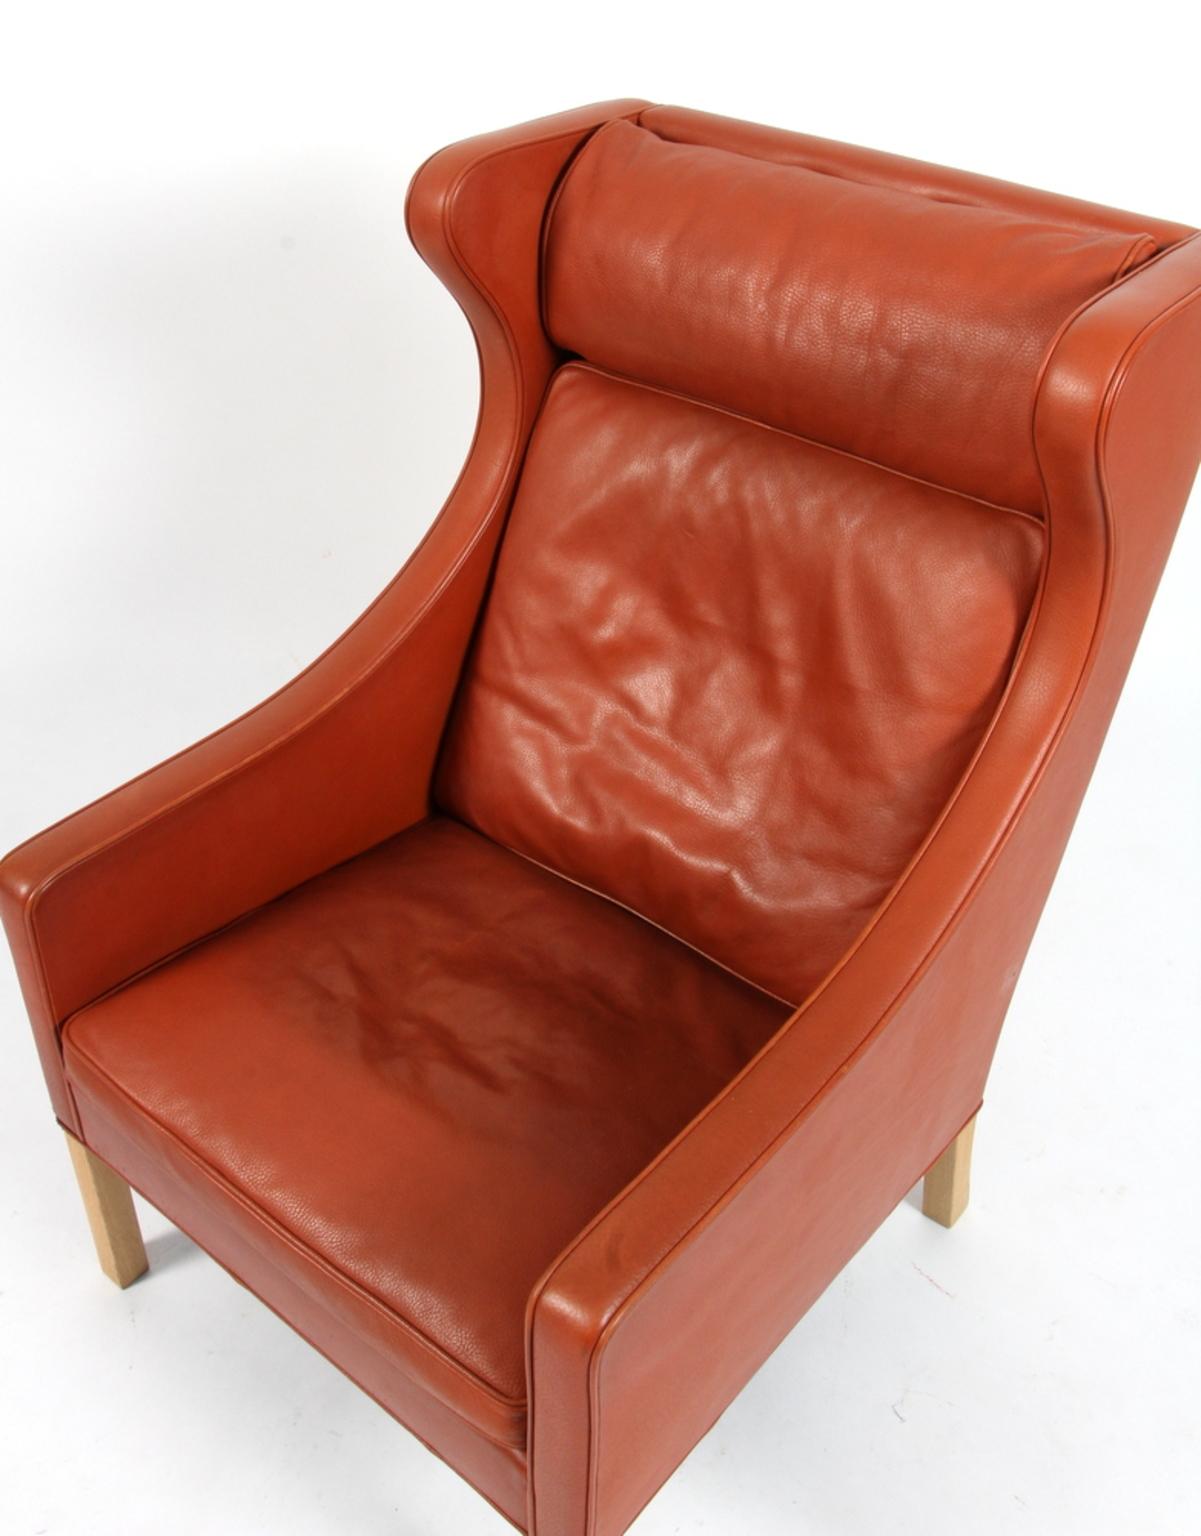 Børge Mogensen wing back chair in original cognac patinated leather upholstery.

Legs in oak.

Model 2204, made by Fredericia Furniture.